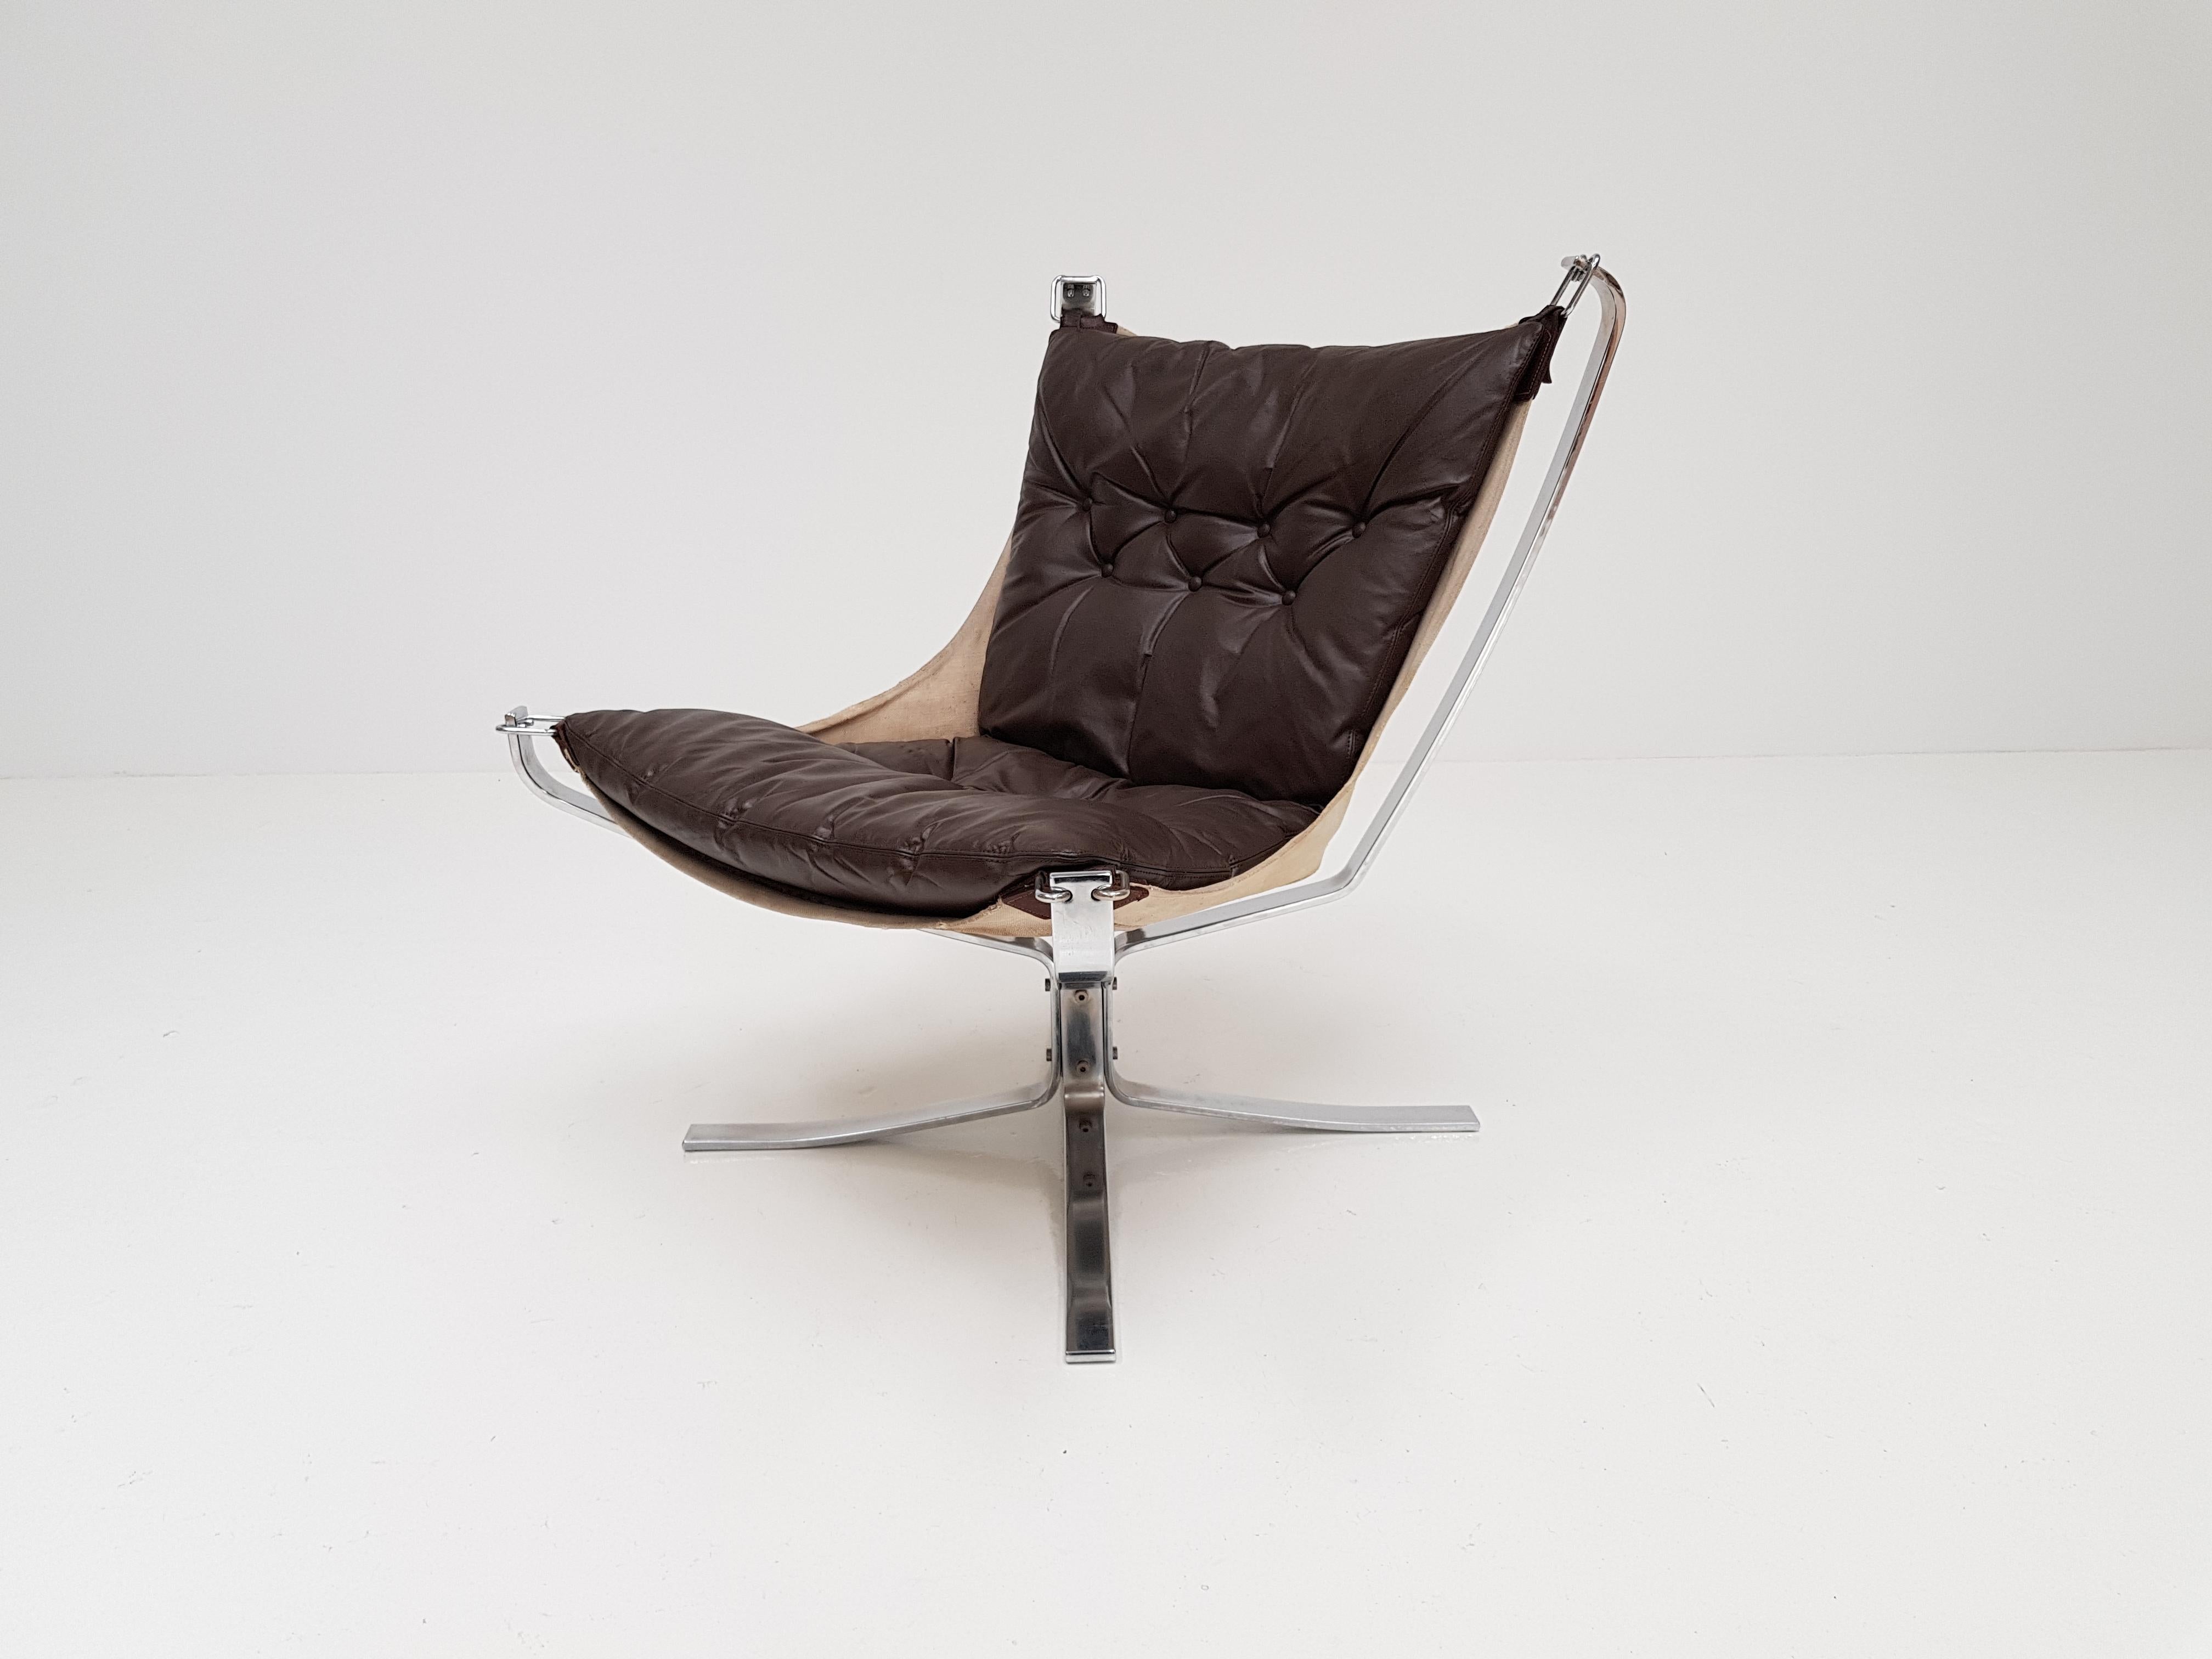 Leather Chrome Based Low-Backed X-Framed Sigurd Ressell Designed 1970s Falcon Chair